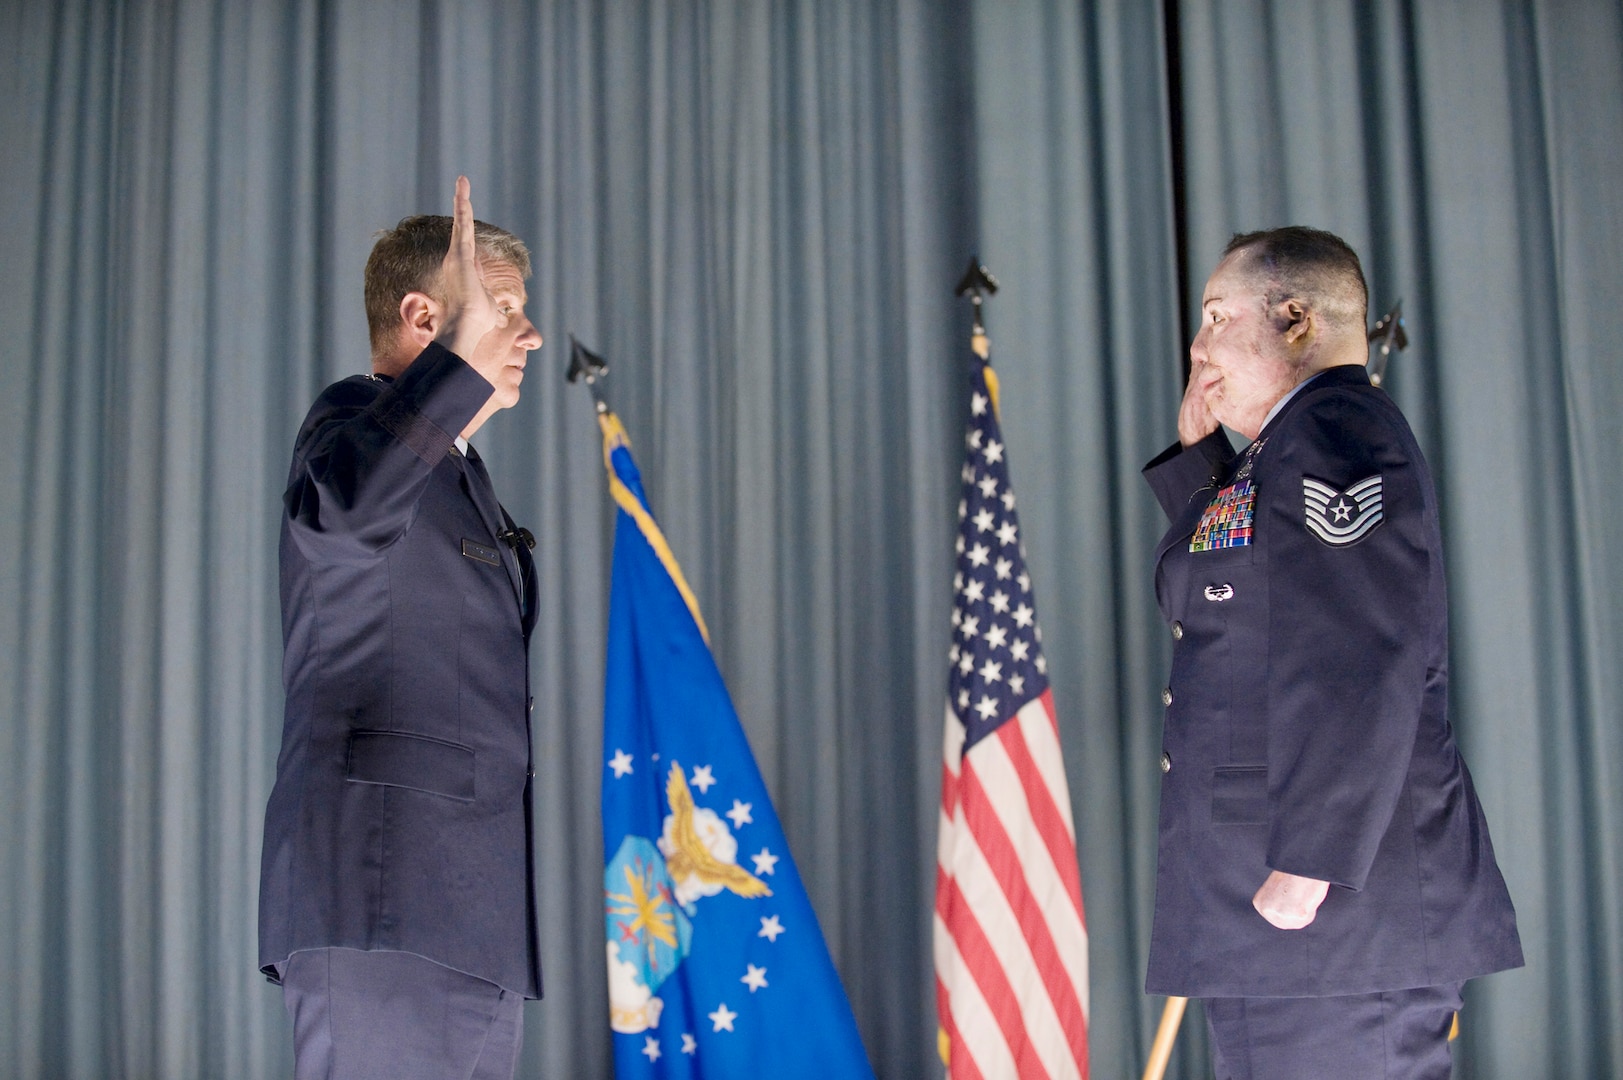 Maj. Gen. Anthony Przybyslawski, vice commander of Air Education and Training Command, administers the oath of enlistment Feb. 8 to Tech. Sgt. Israel Del Toro in the nearly packed base theater at Randolph Air Force Base, Texas. Sergeant Del Toro suffered burns to more than 80 percent of his body after his vehicle was struck by an improvised explosive device in Afghanistan. (U.S. Air Force photo/Steve Thurow)